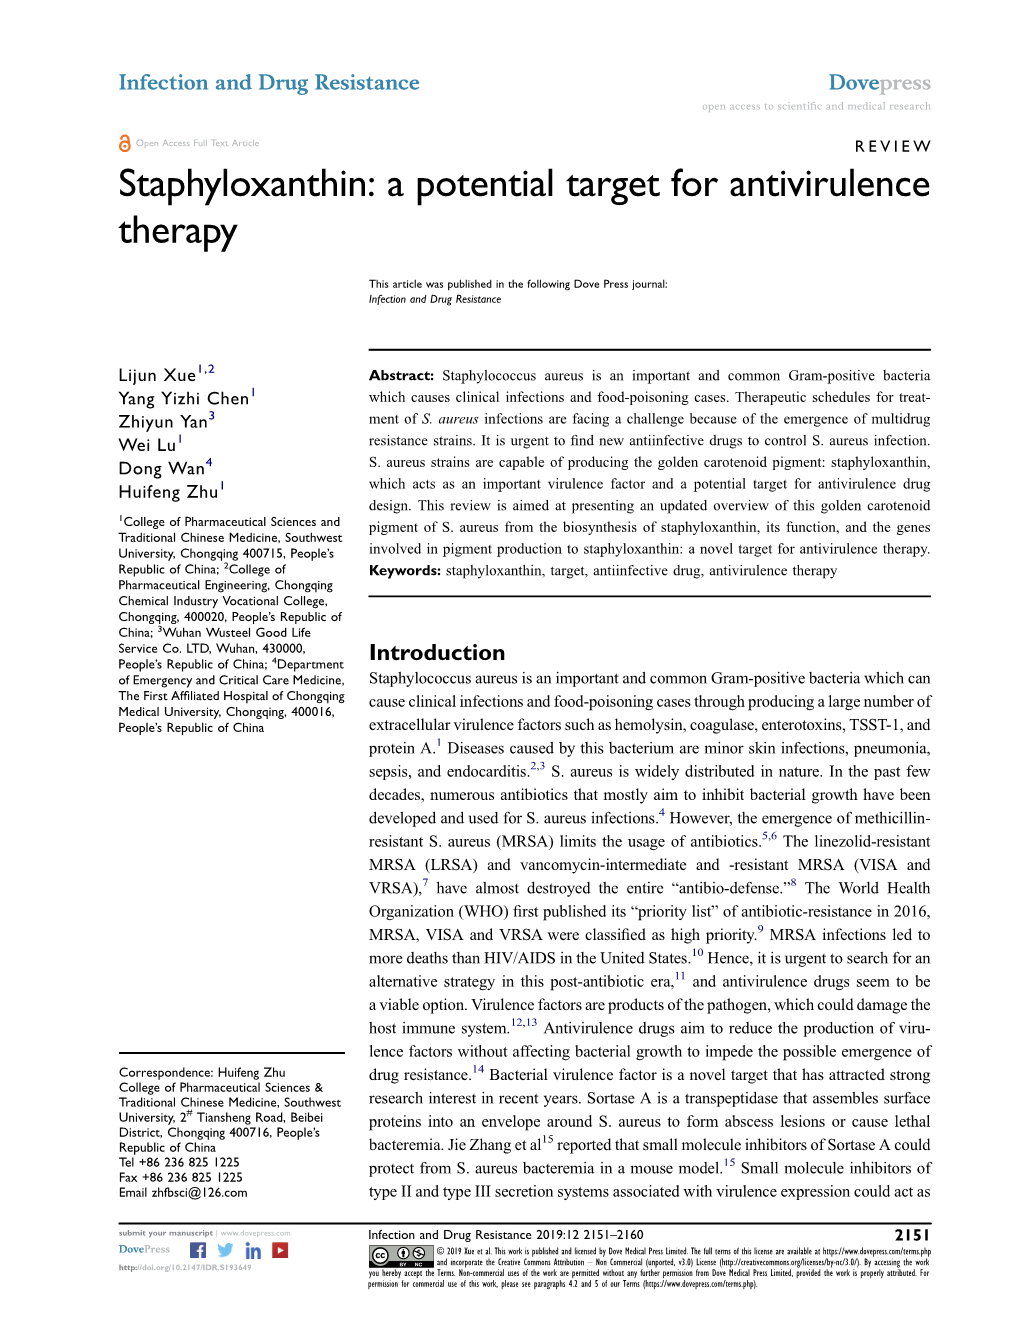 Staphyloxanthin: a Potential Target for Antivirulence Therapy